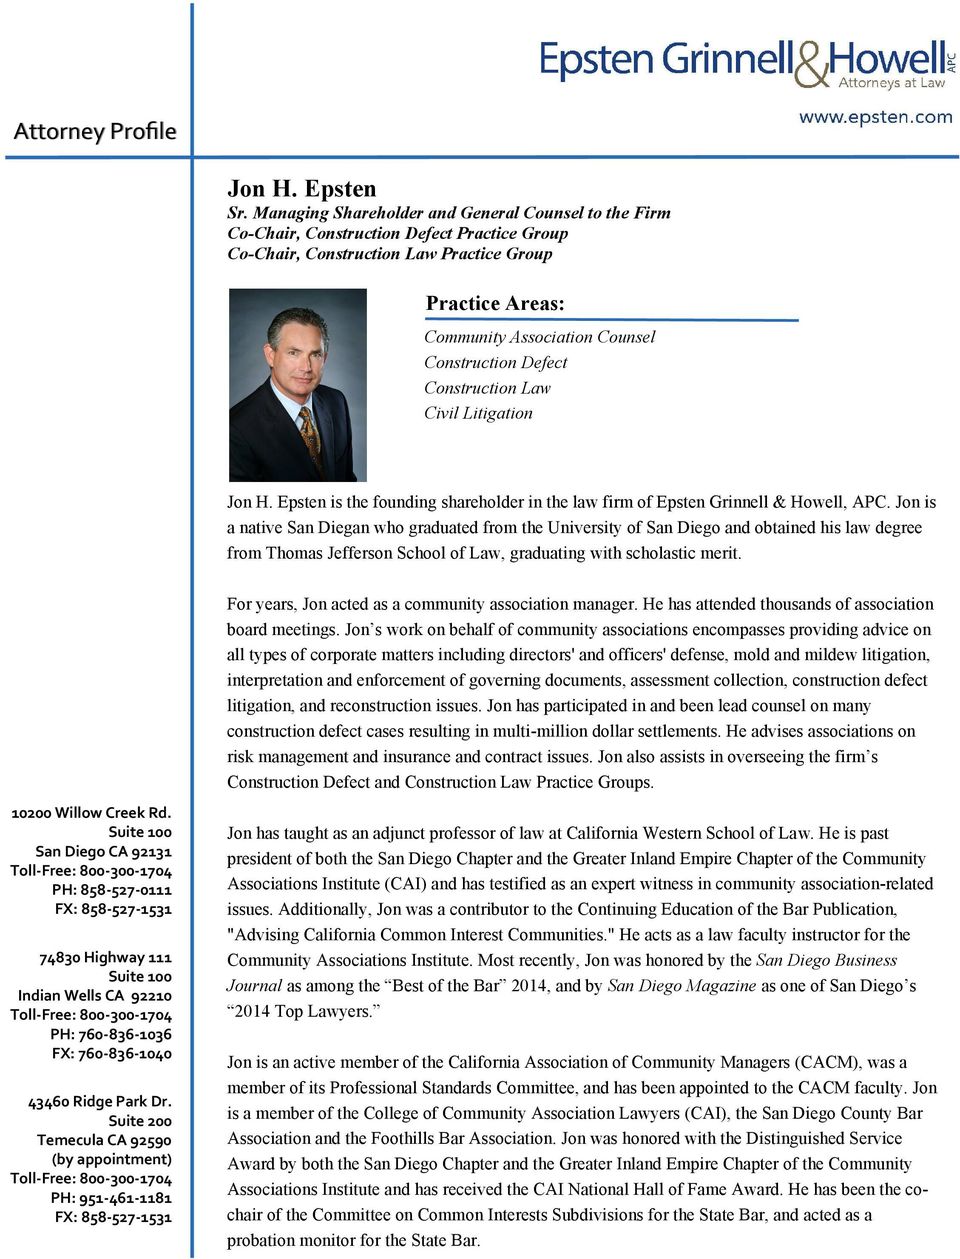 Epsten is the founding shareholder in the law firm of Epsten Grinnell & Howell, APC.